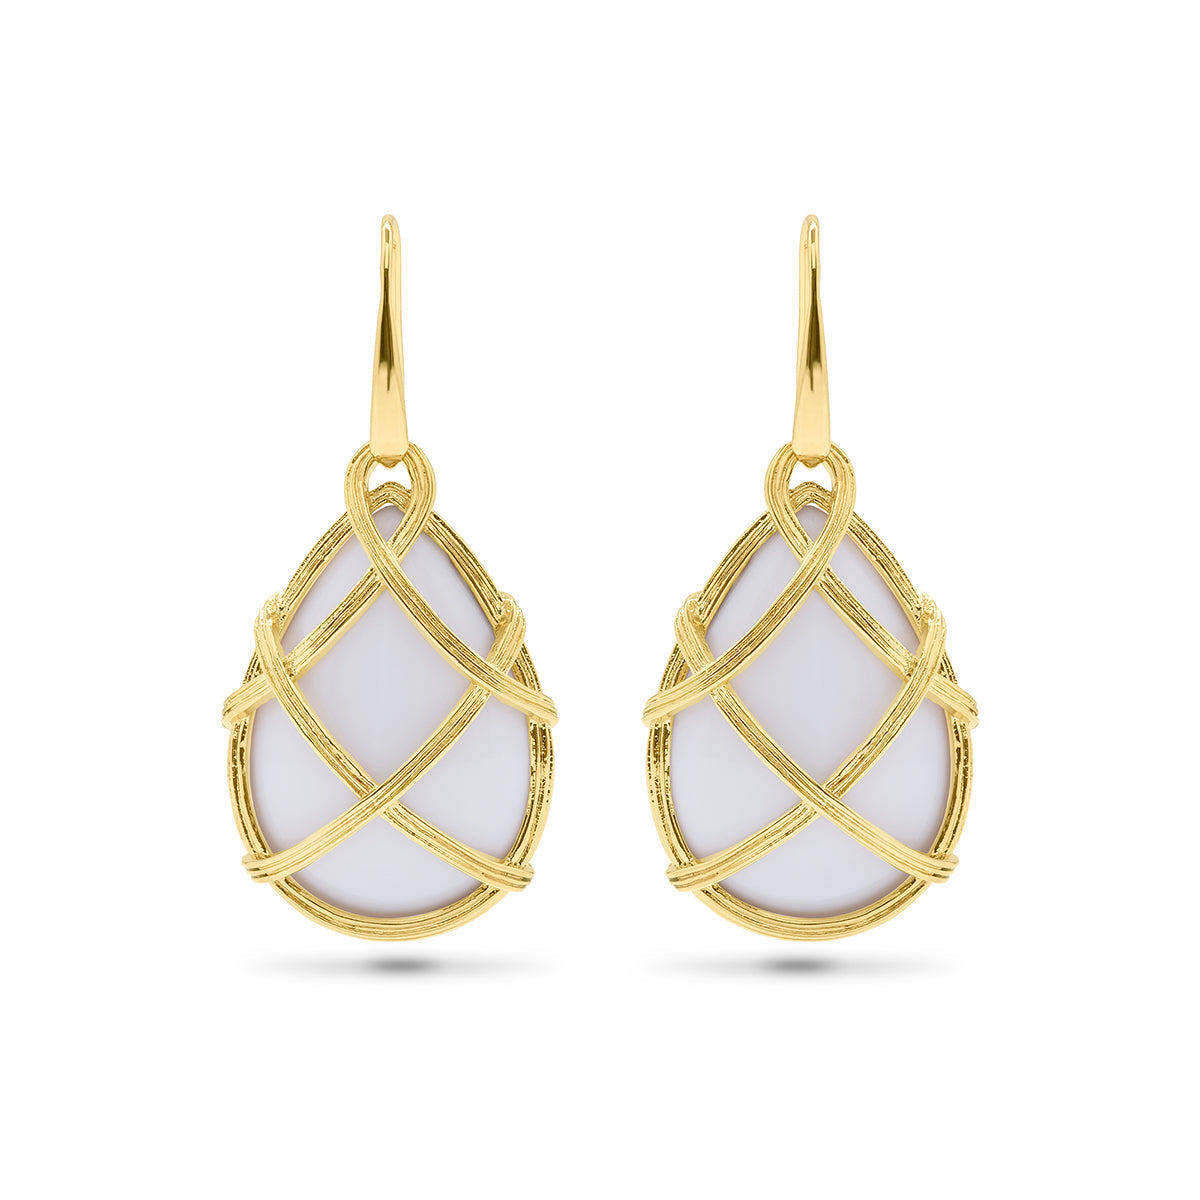 Wrapped in lustrous gold lattice, these glossy white resin drops are a timeless accessory to be worn with every outfit in every season.  